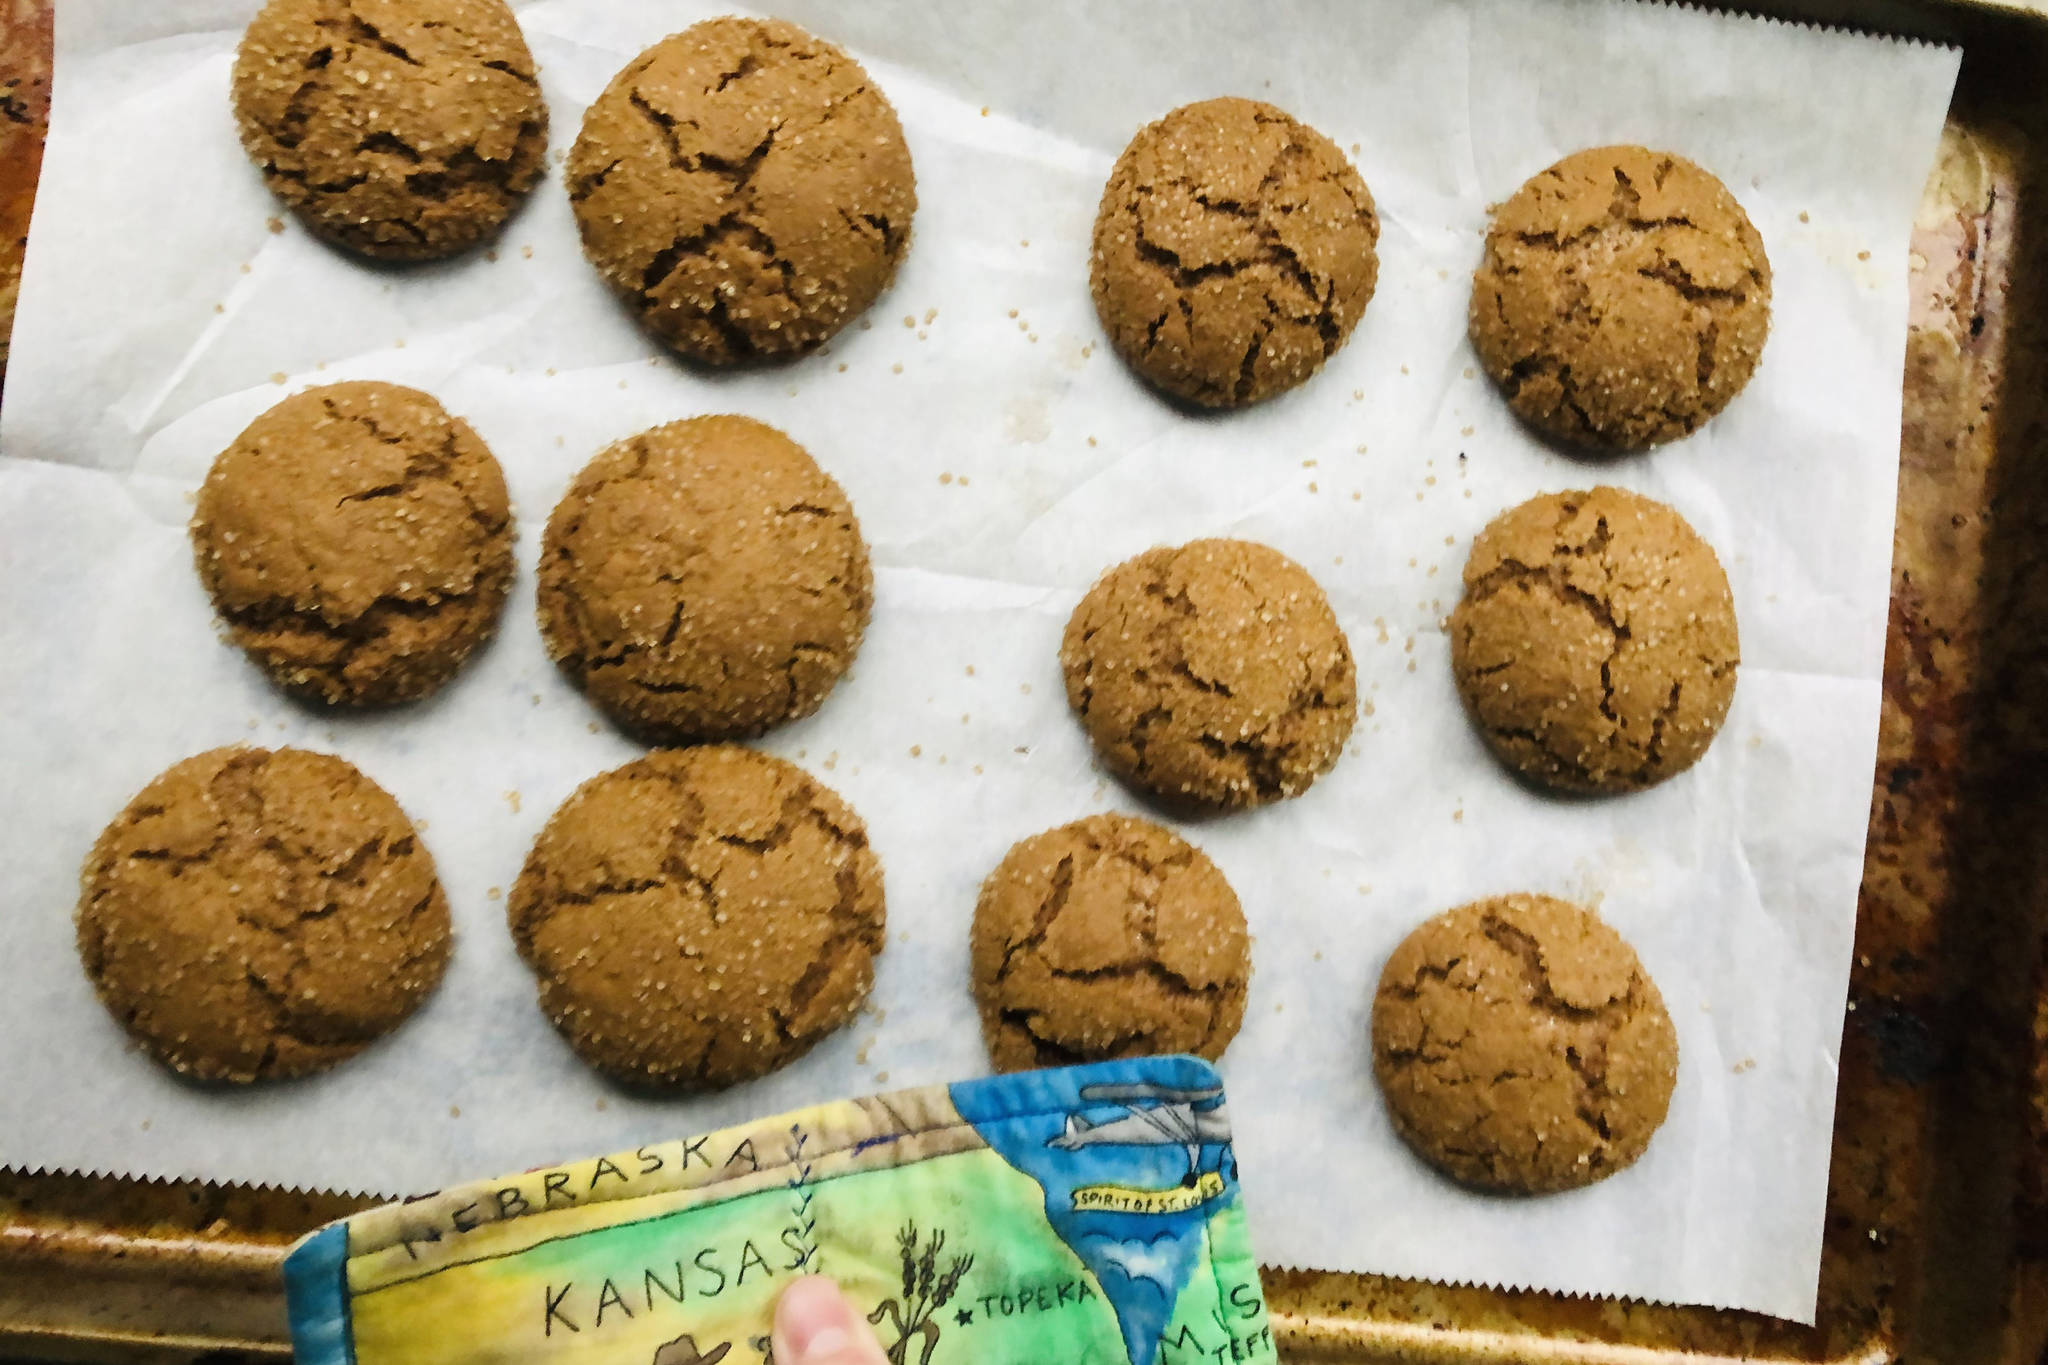 Ginger molasses cookies make for a delicious, chewy way to spread holiday cheer to family and friends isolated during the pandemic, photographed on Nov. 30, 2020, in Anchorage, Alaska. (Photo by Victoria Petersen/Peninsula Clarion)